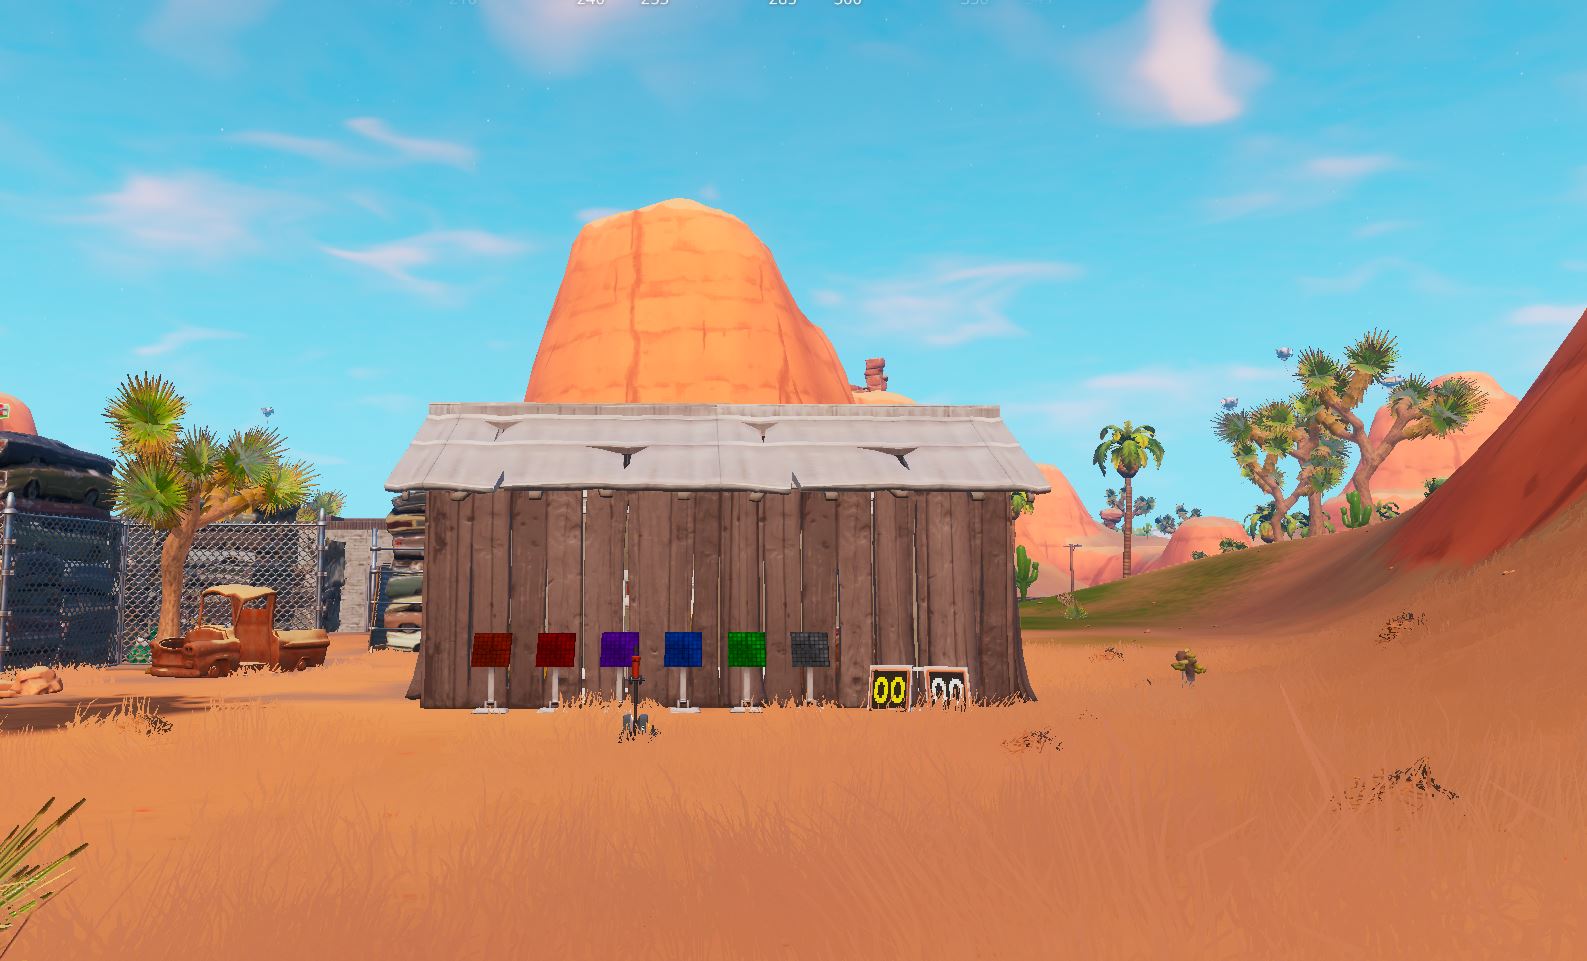 Fortnite Resolver Puzzle Desert Fortnite Fortbyte 28 Accessible By Solving The Pattern Match Puzzle Outside A Desert Junkyard Fortnite Insider